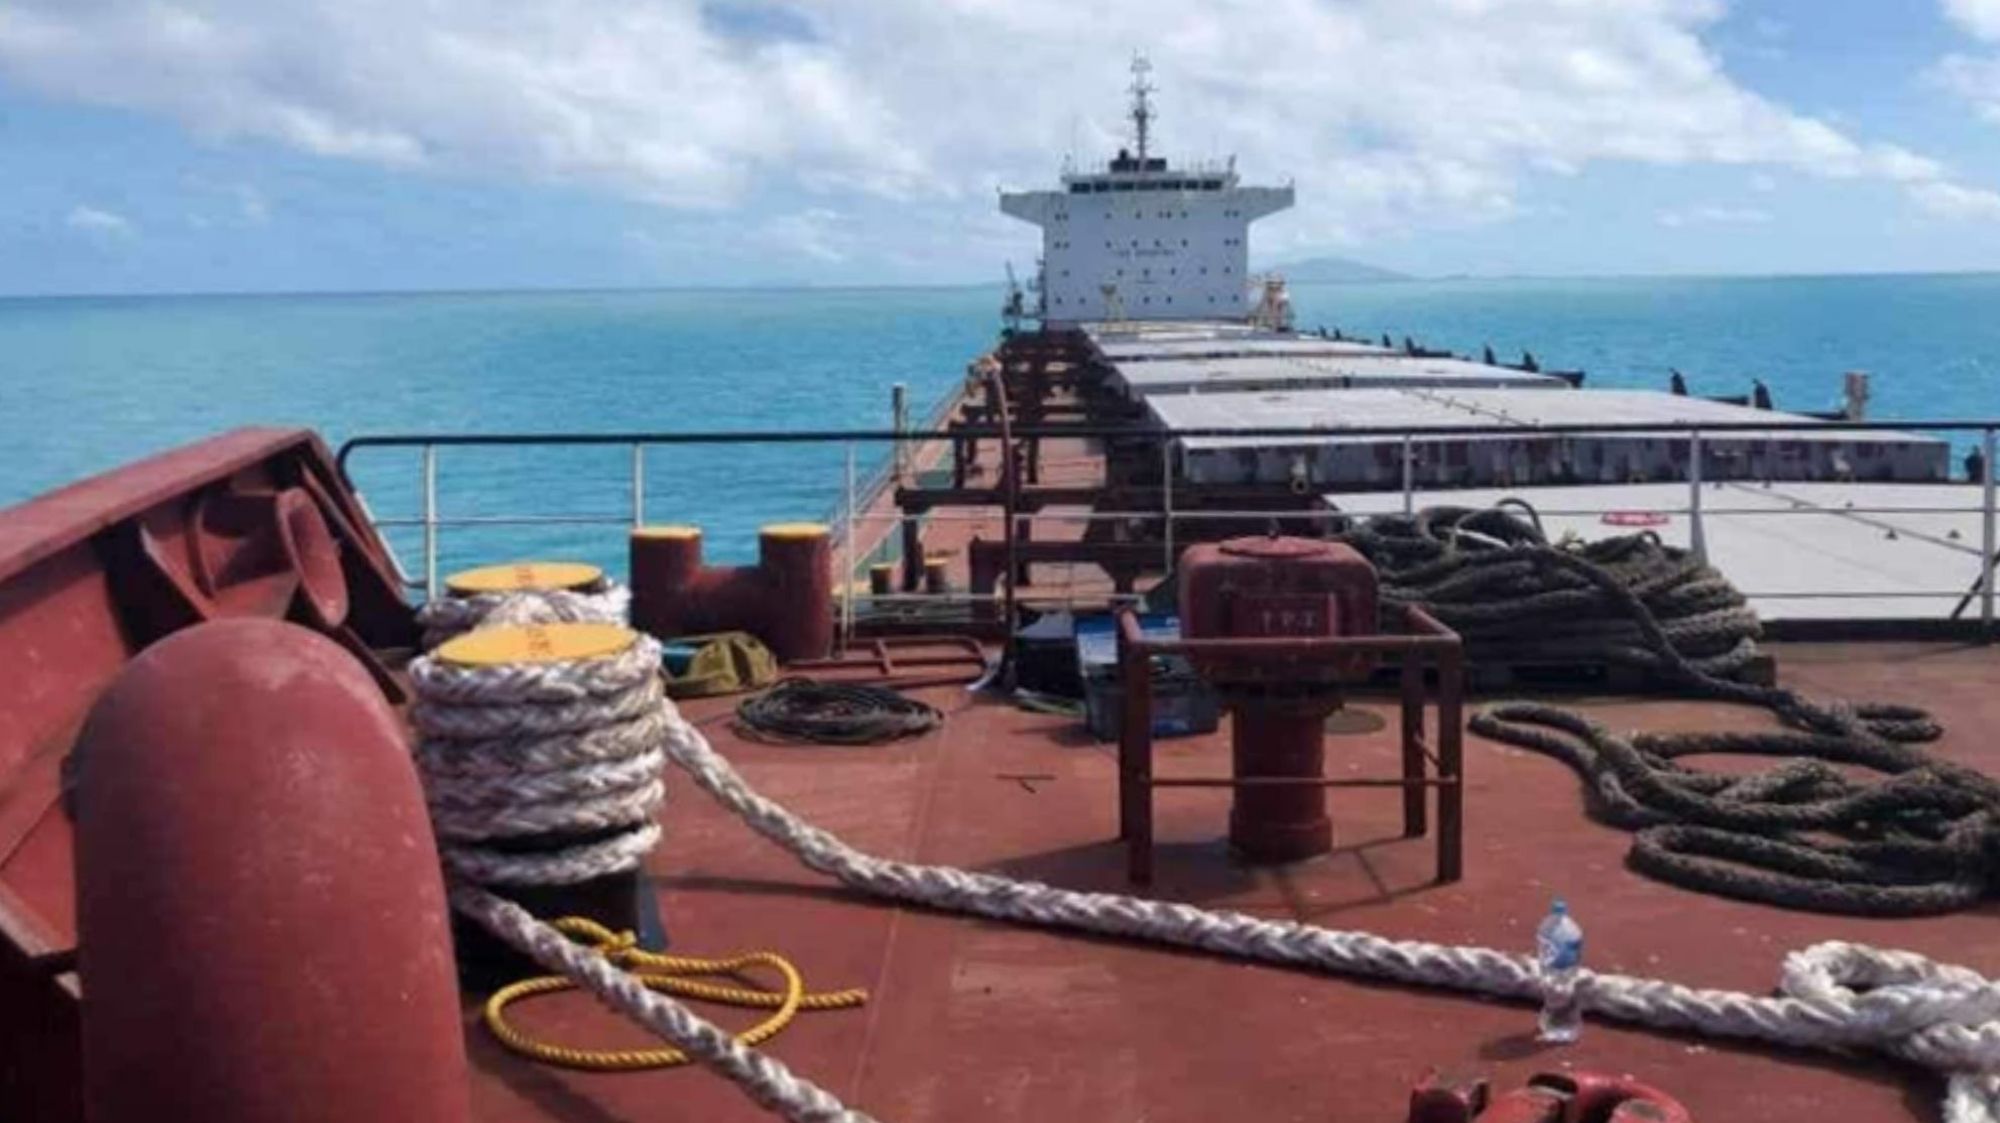 Technical Support to Bulk Carrier – Emergency Queensland Launch Service to Hay Point, Mackay